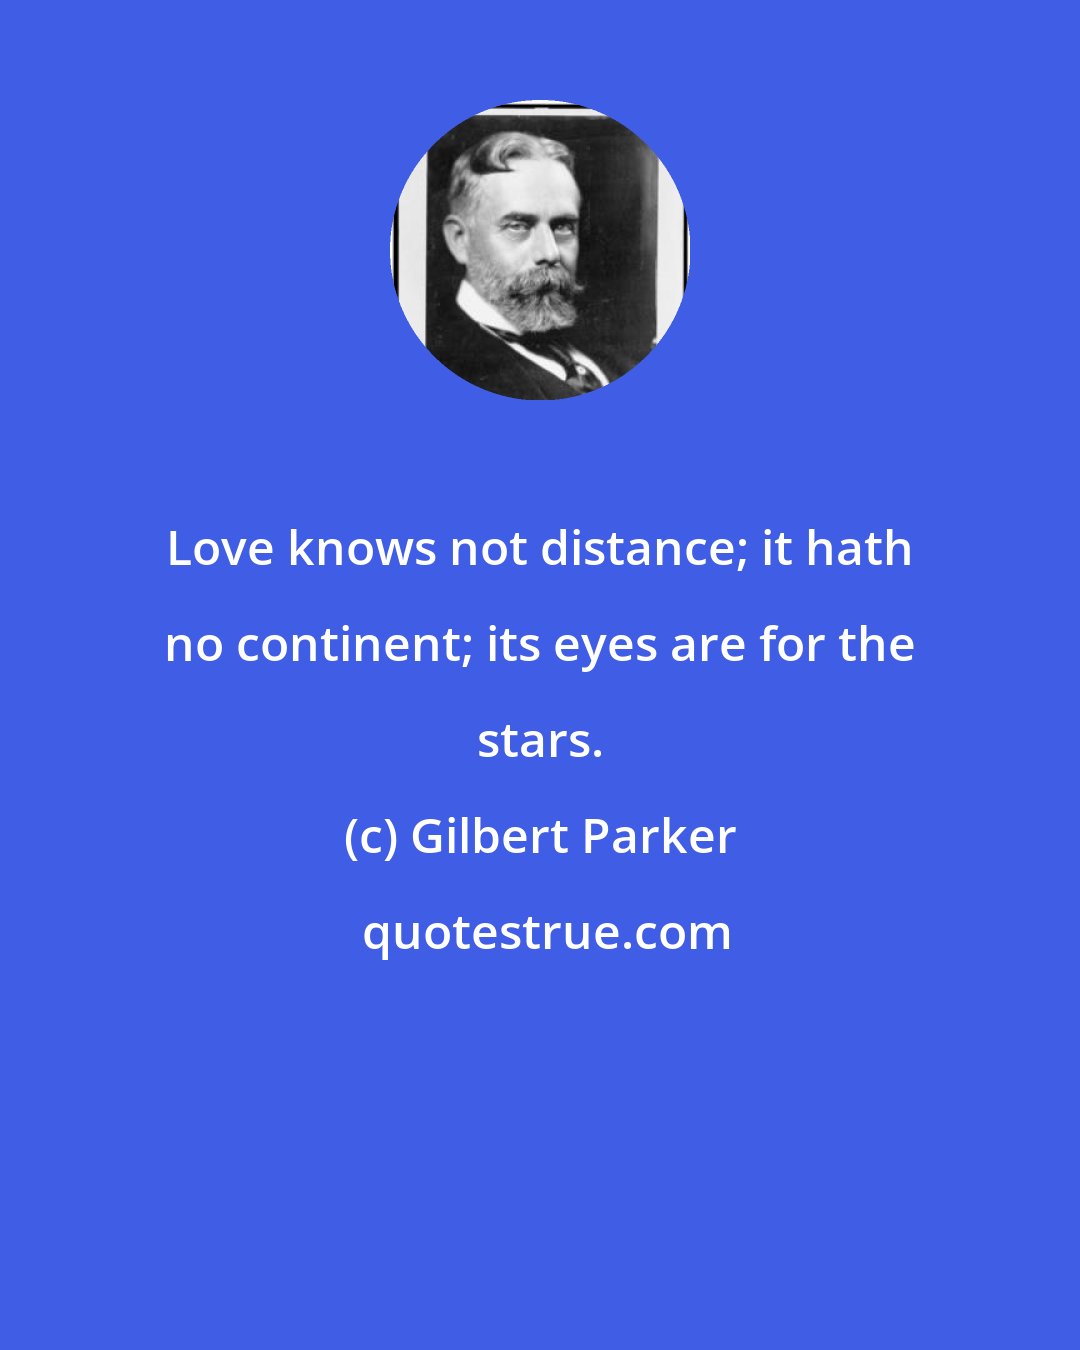 Gilbert Parker: Love knows not distance; it hath no continent; its eyes are for the stars.